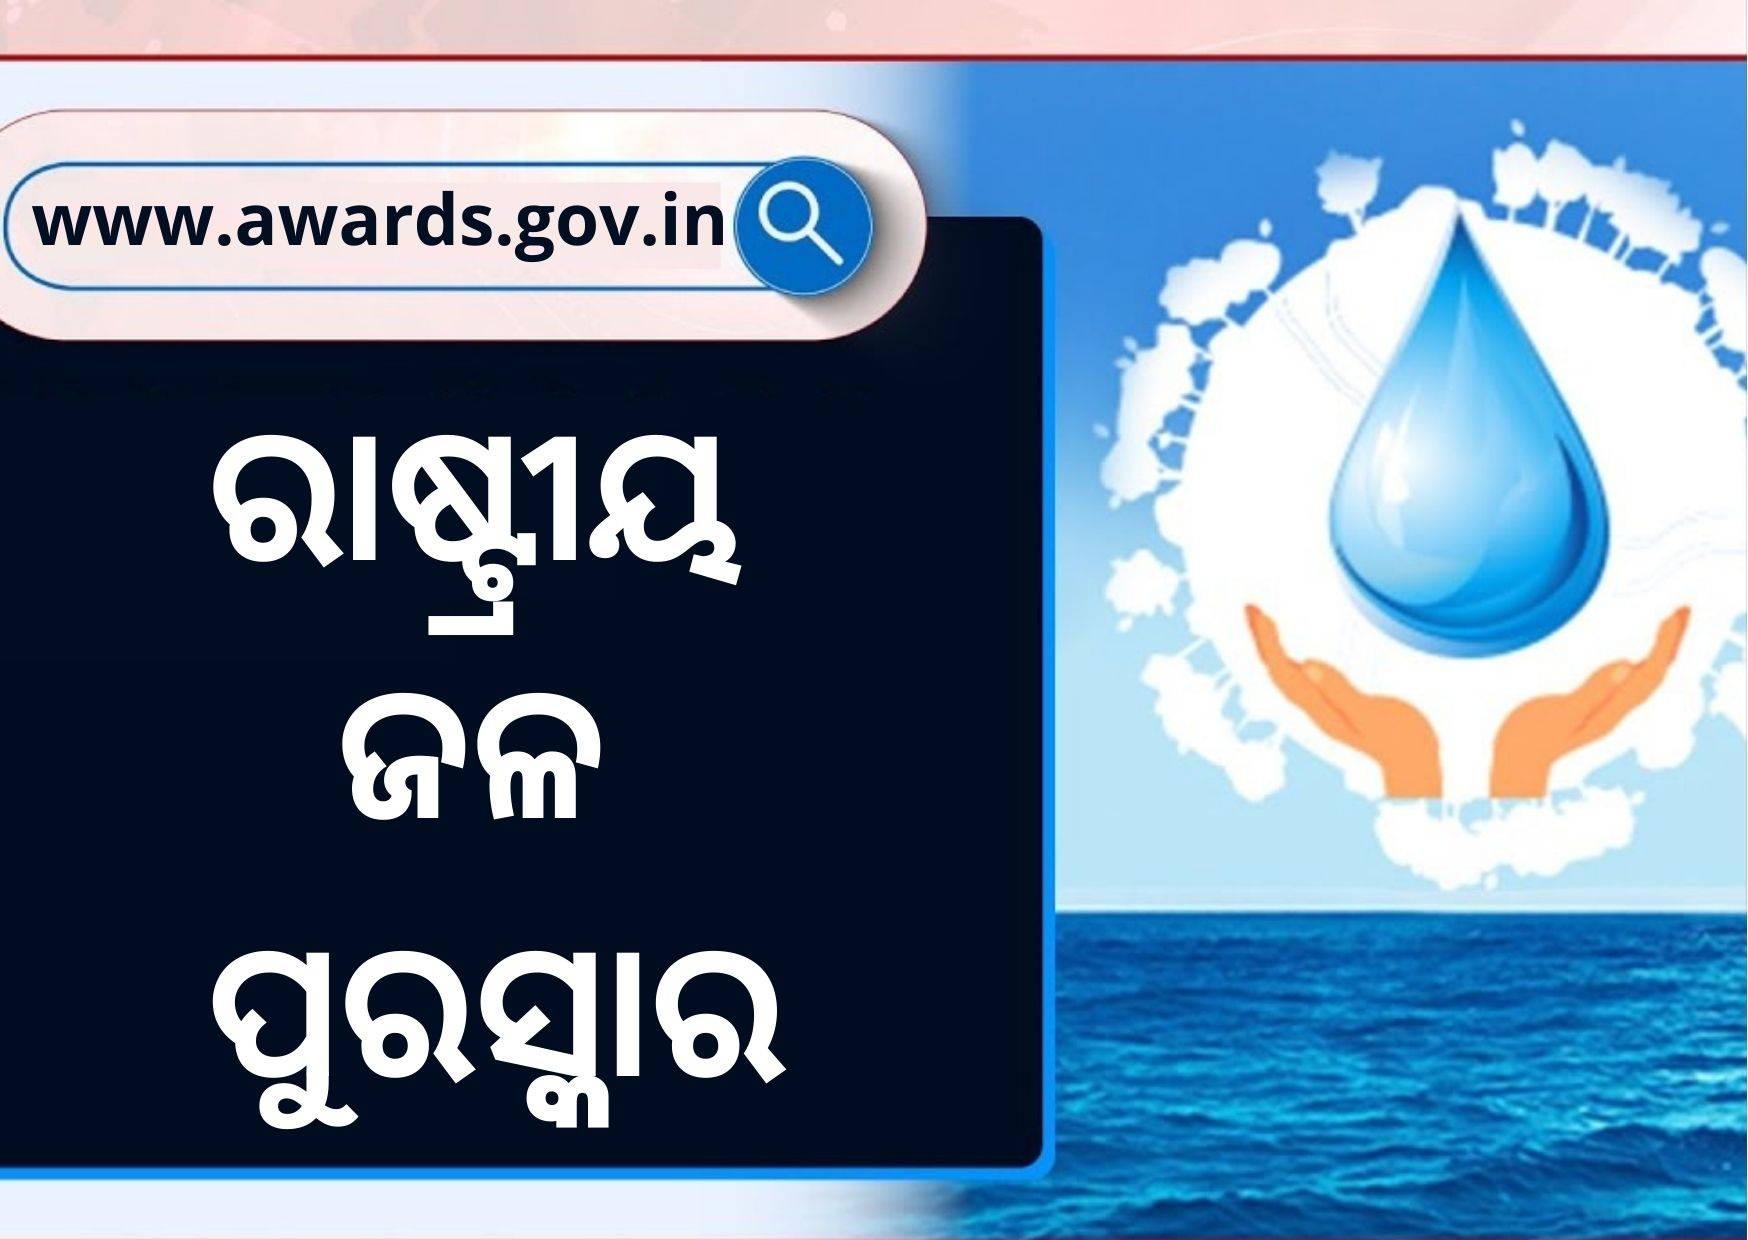 4th National Water Awards: Last Date For Submitting Application Is 15th September 2022